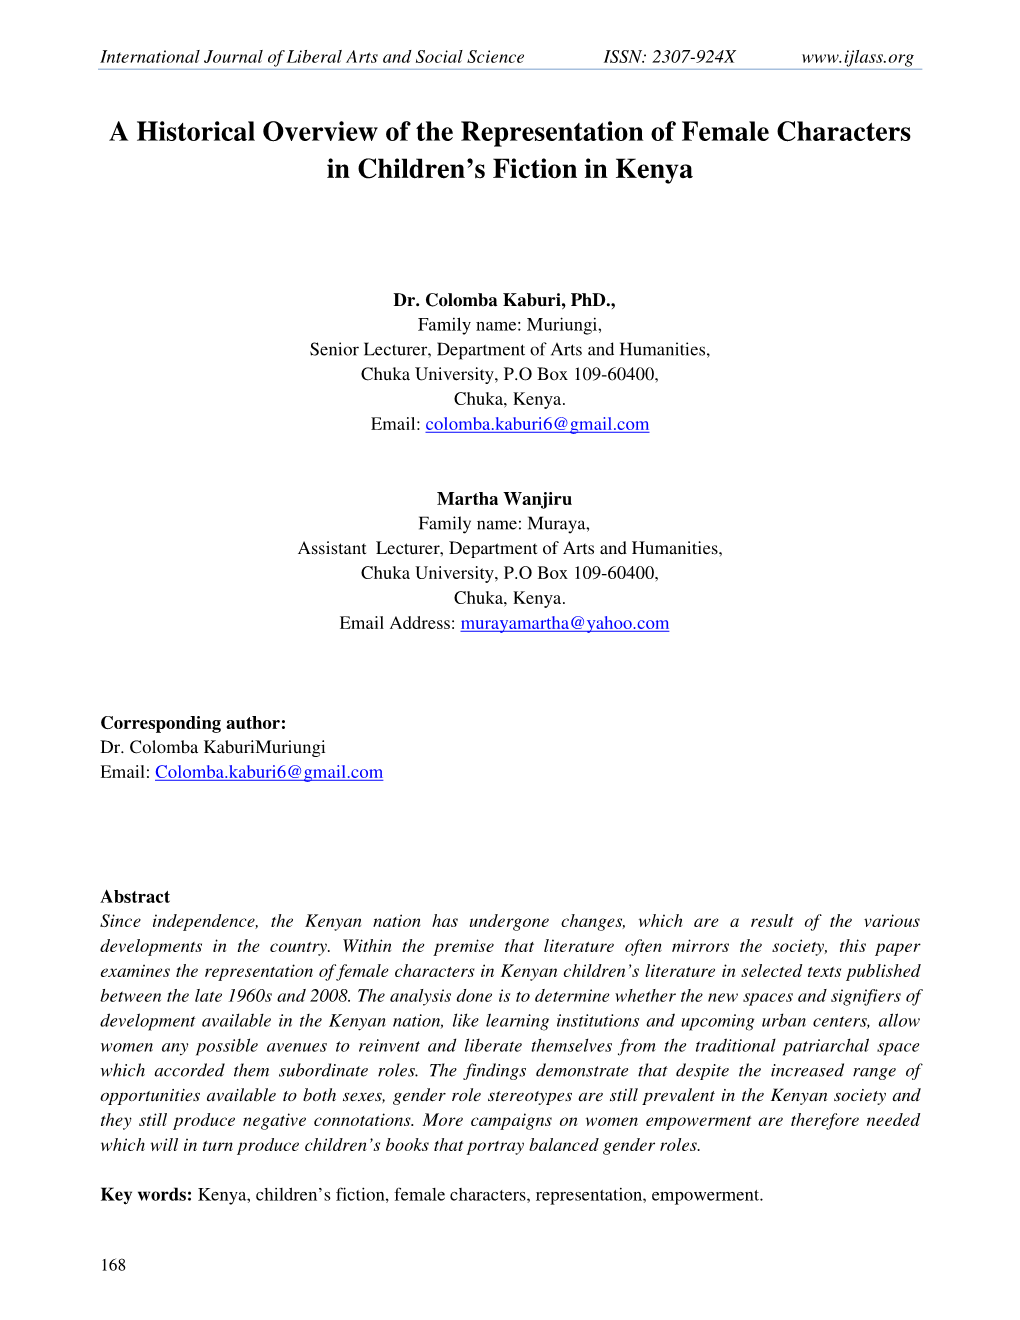 A Historical Overview of the Representation of Female Characters in Children’S Fiction in Kenya